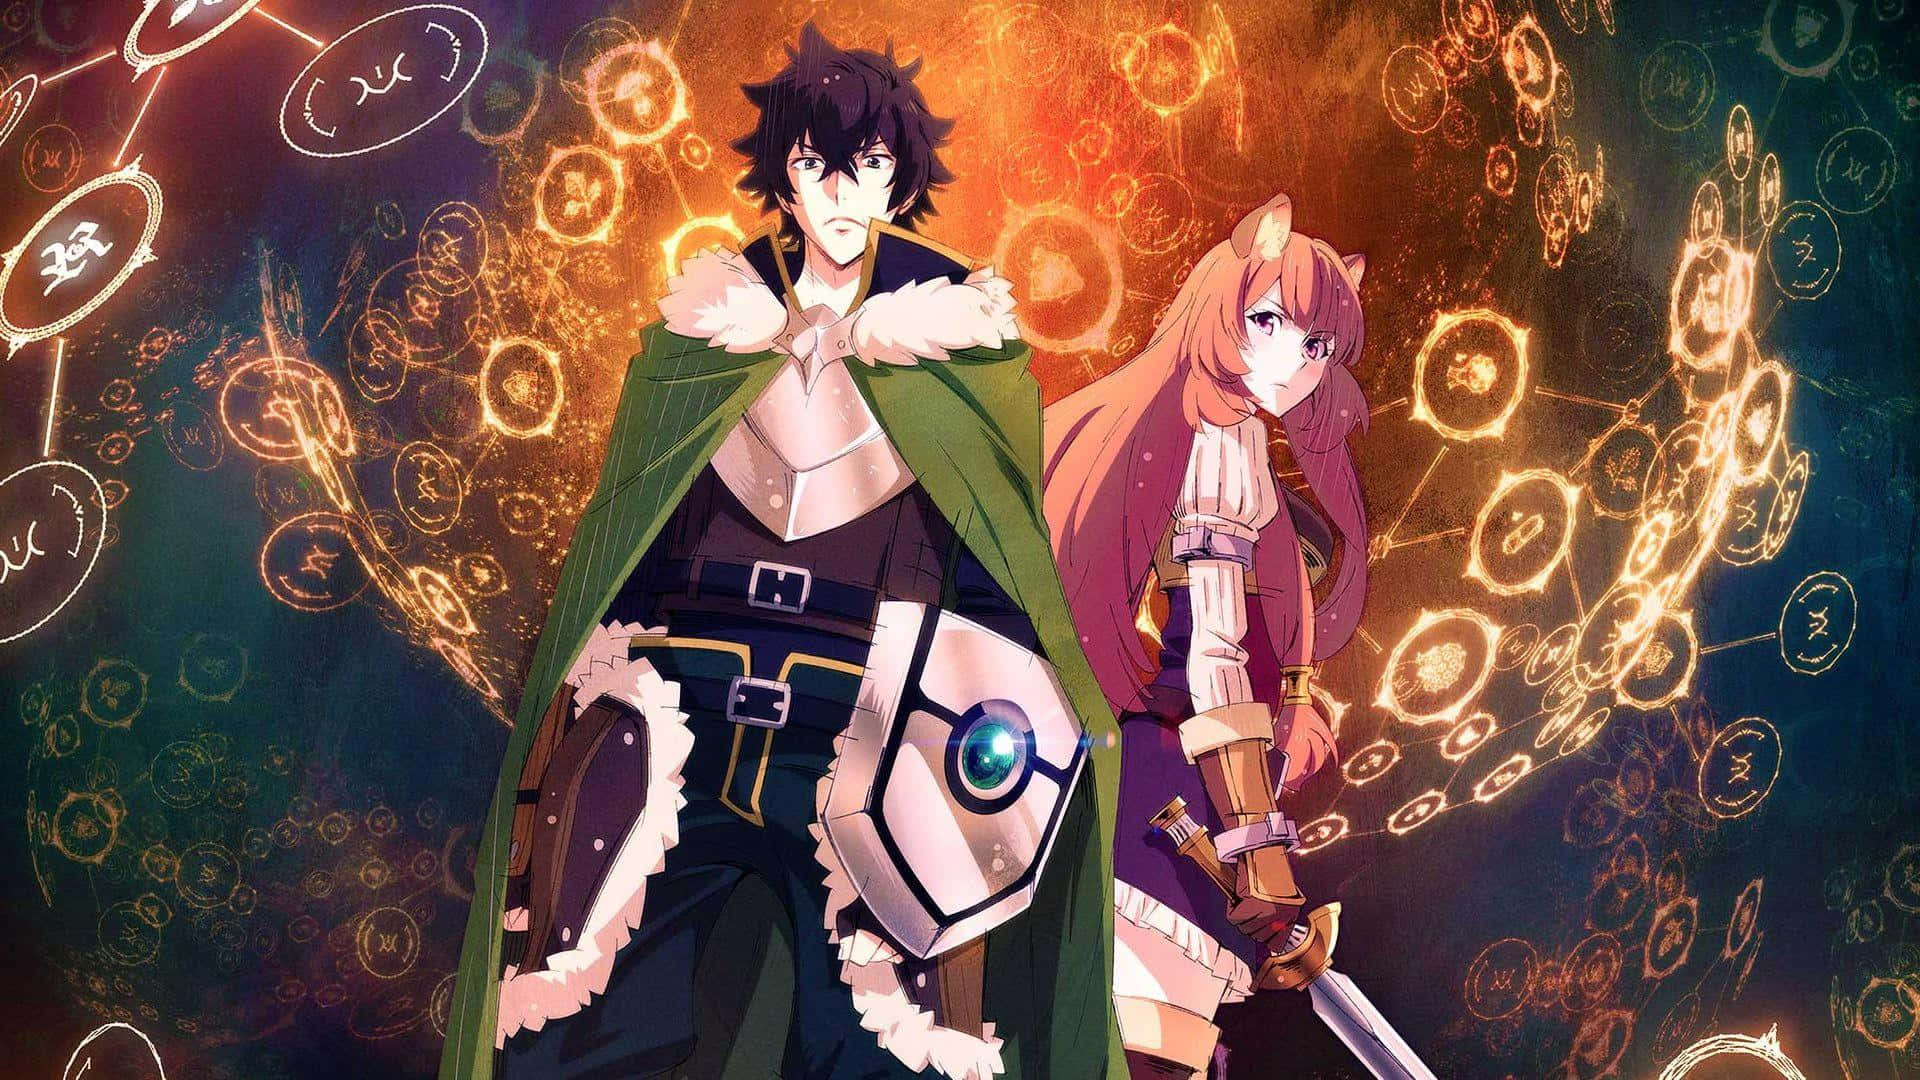 "Protecting the world with Shield Hero!"